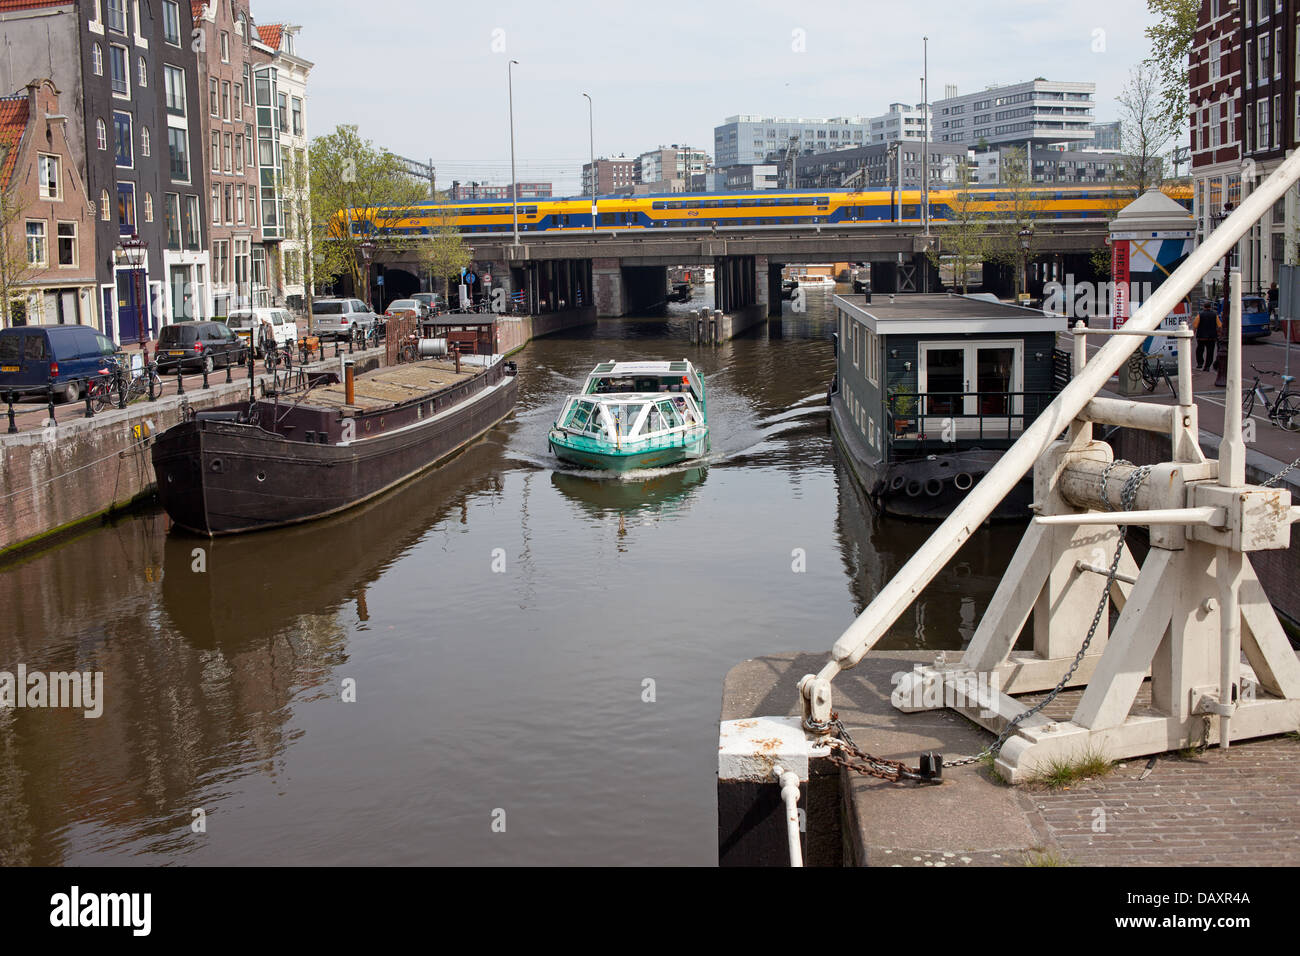 Amsterdam cityscape in Netherlands, canal with houseboats and passenger boat, apartment buildings, train on a bridge. Stock Photo